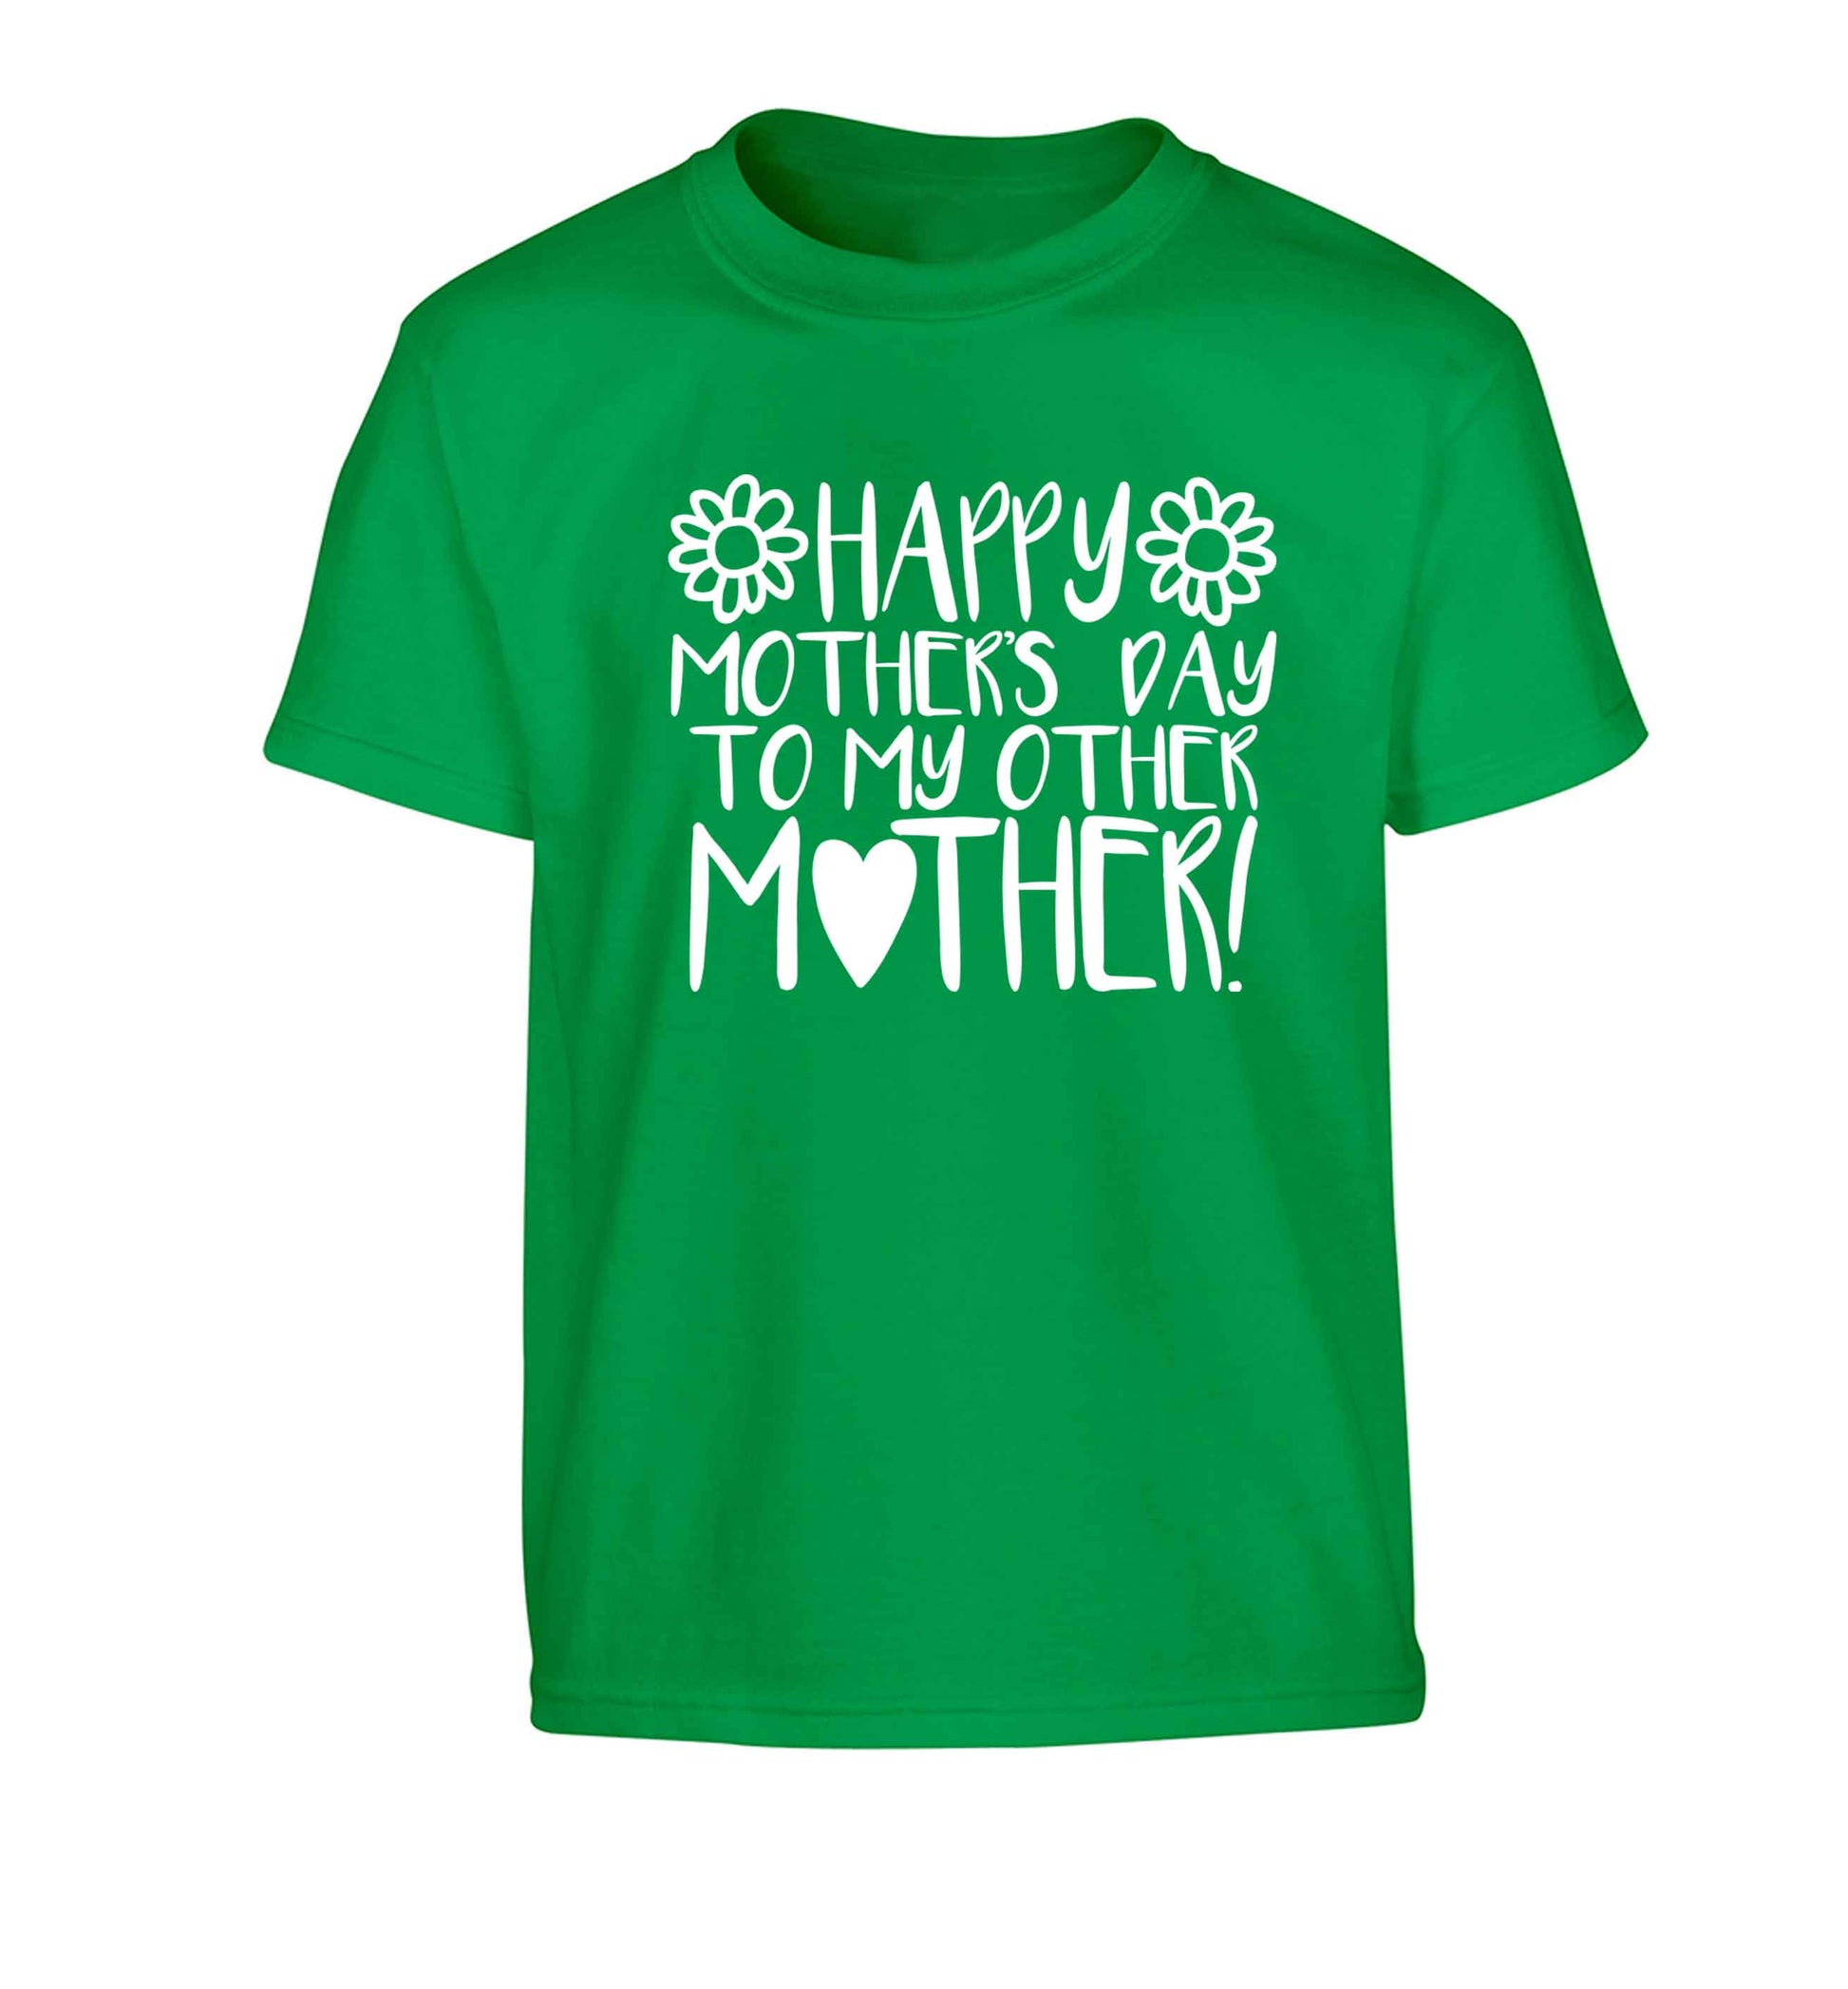 Happy mother's day to my other mother Children's green Tshirt 12-13 Years